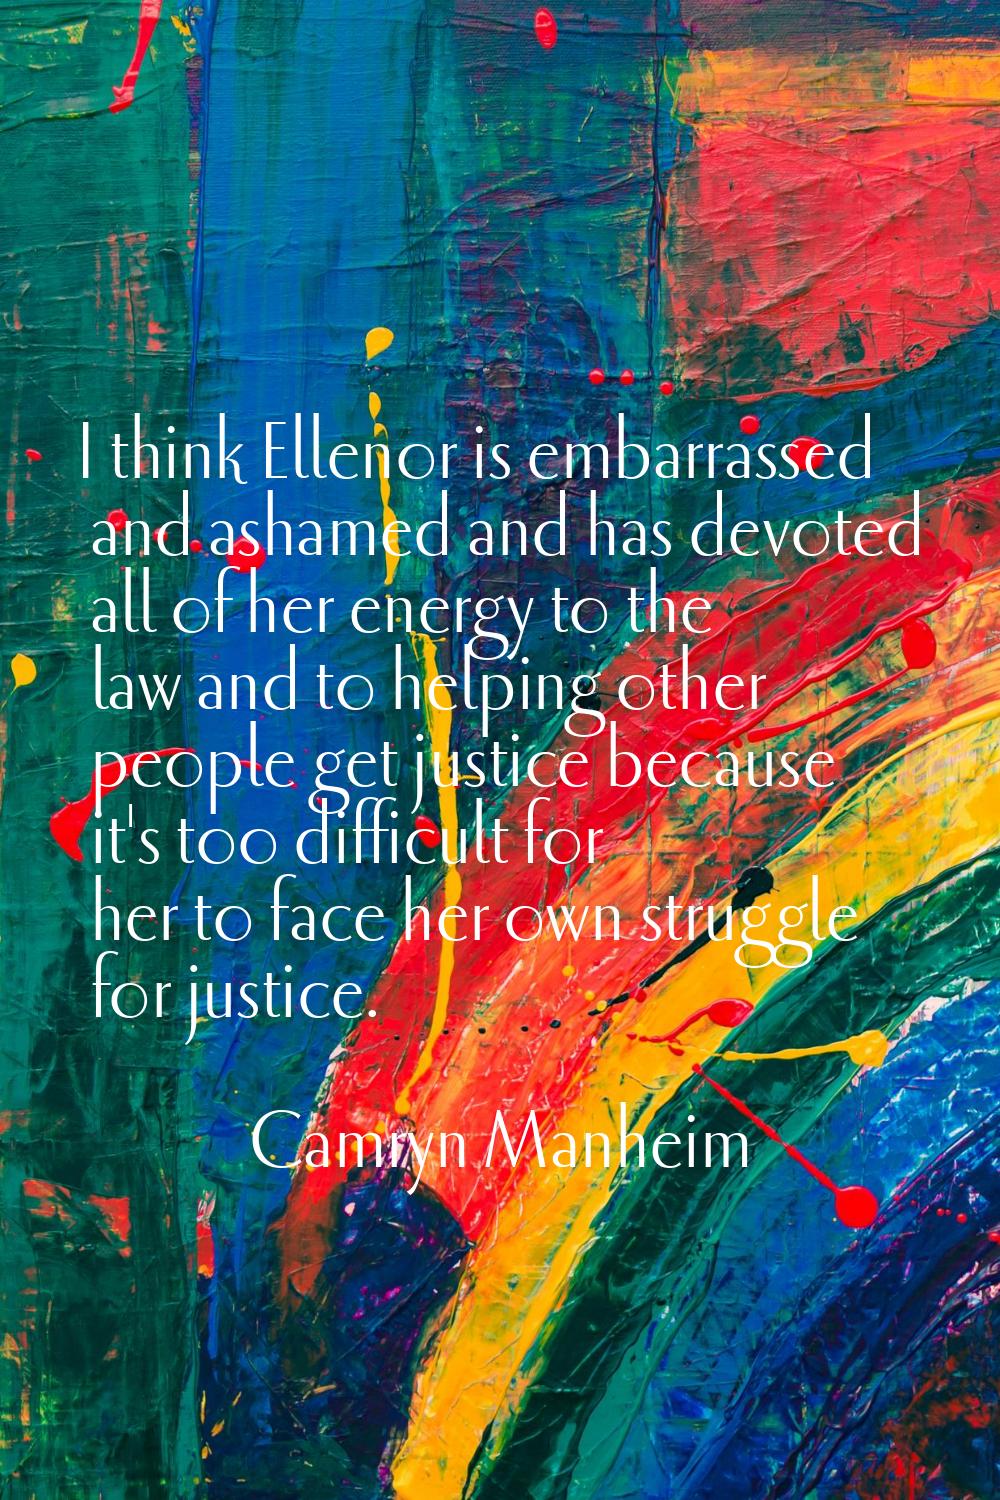 I think Ellenor is embarrassed and ashamed and has devoted all of her energy to the law and to help